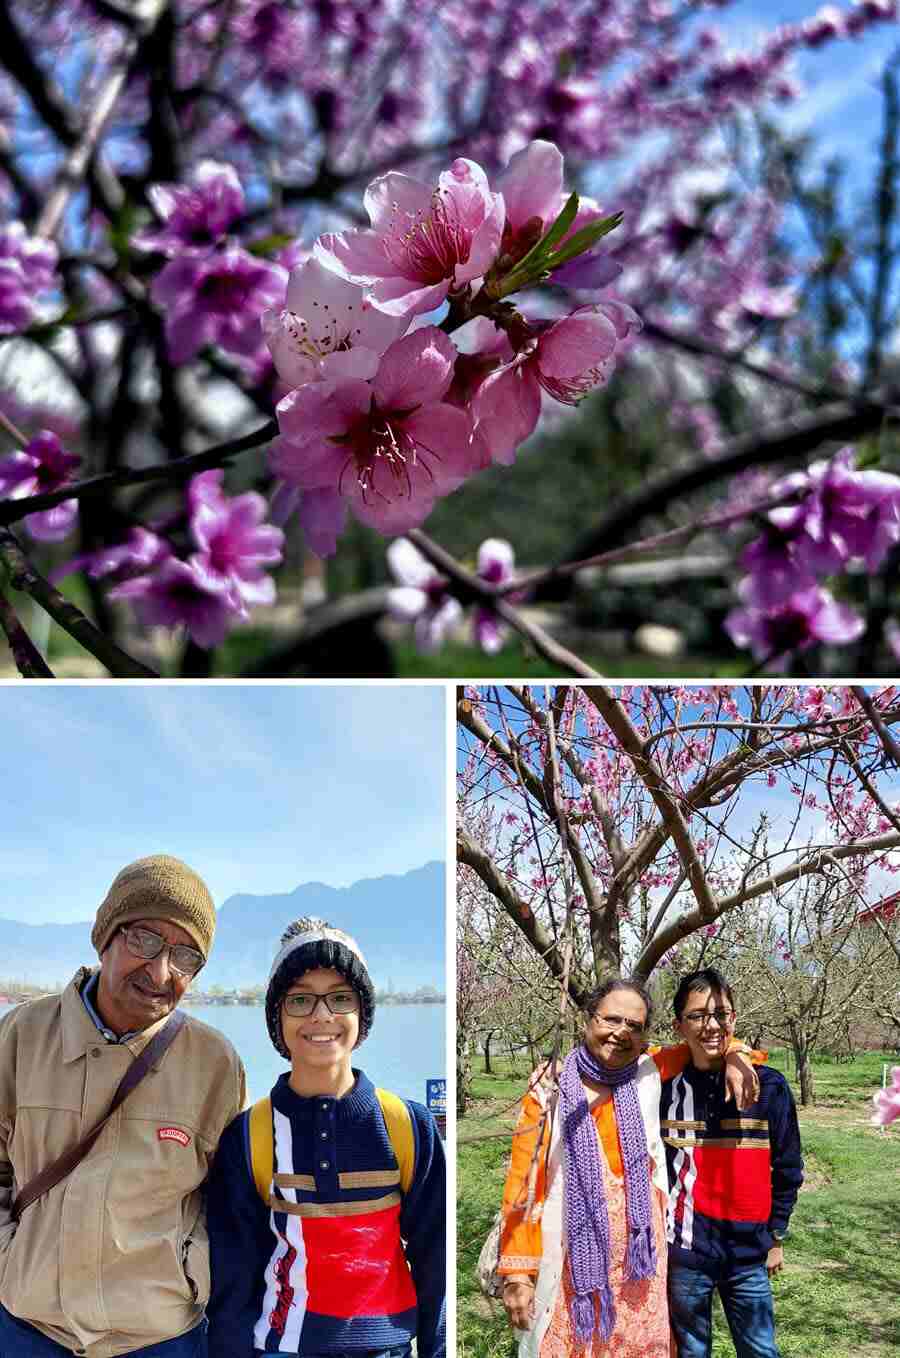 We stopped on the way to Pahalgam and excitedly made our way to random cherry orchards in bloom